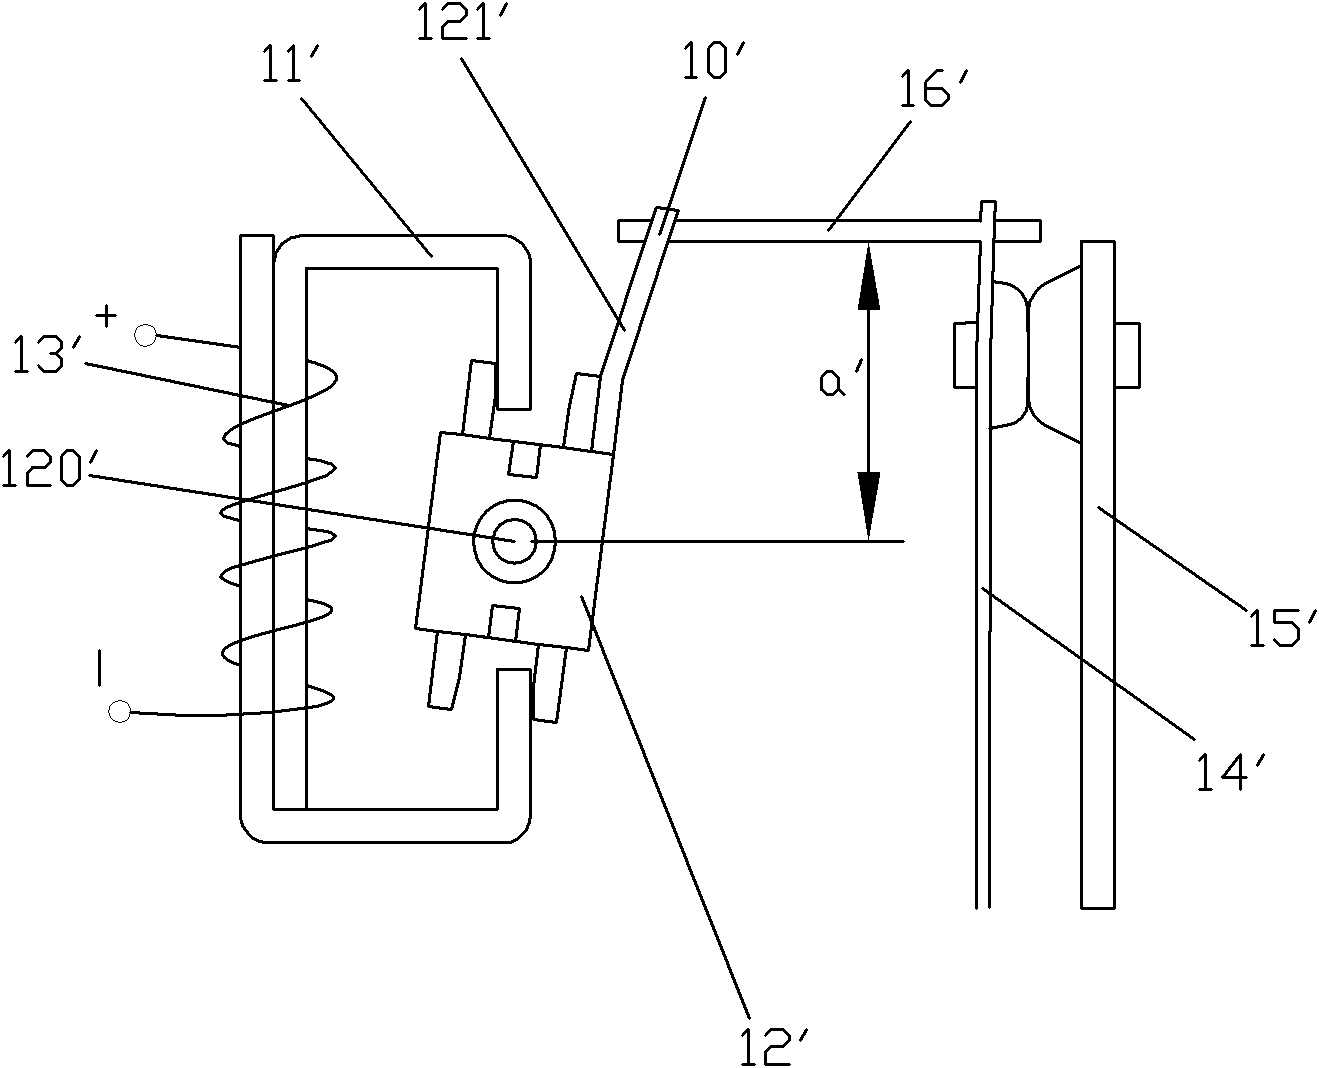 Magnetic latching relay with symmetrical transmission structure